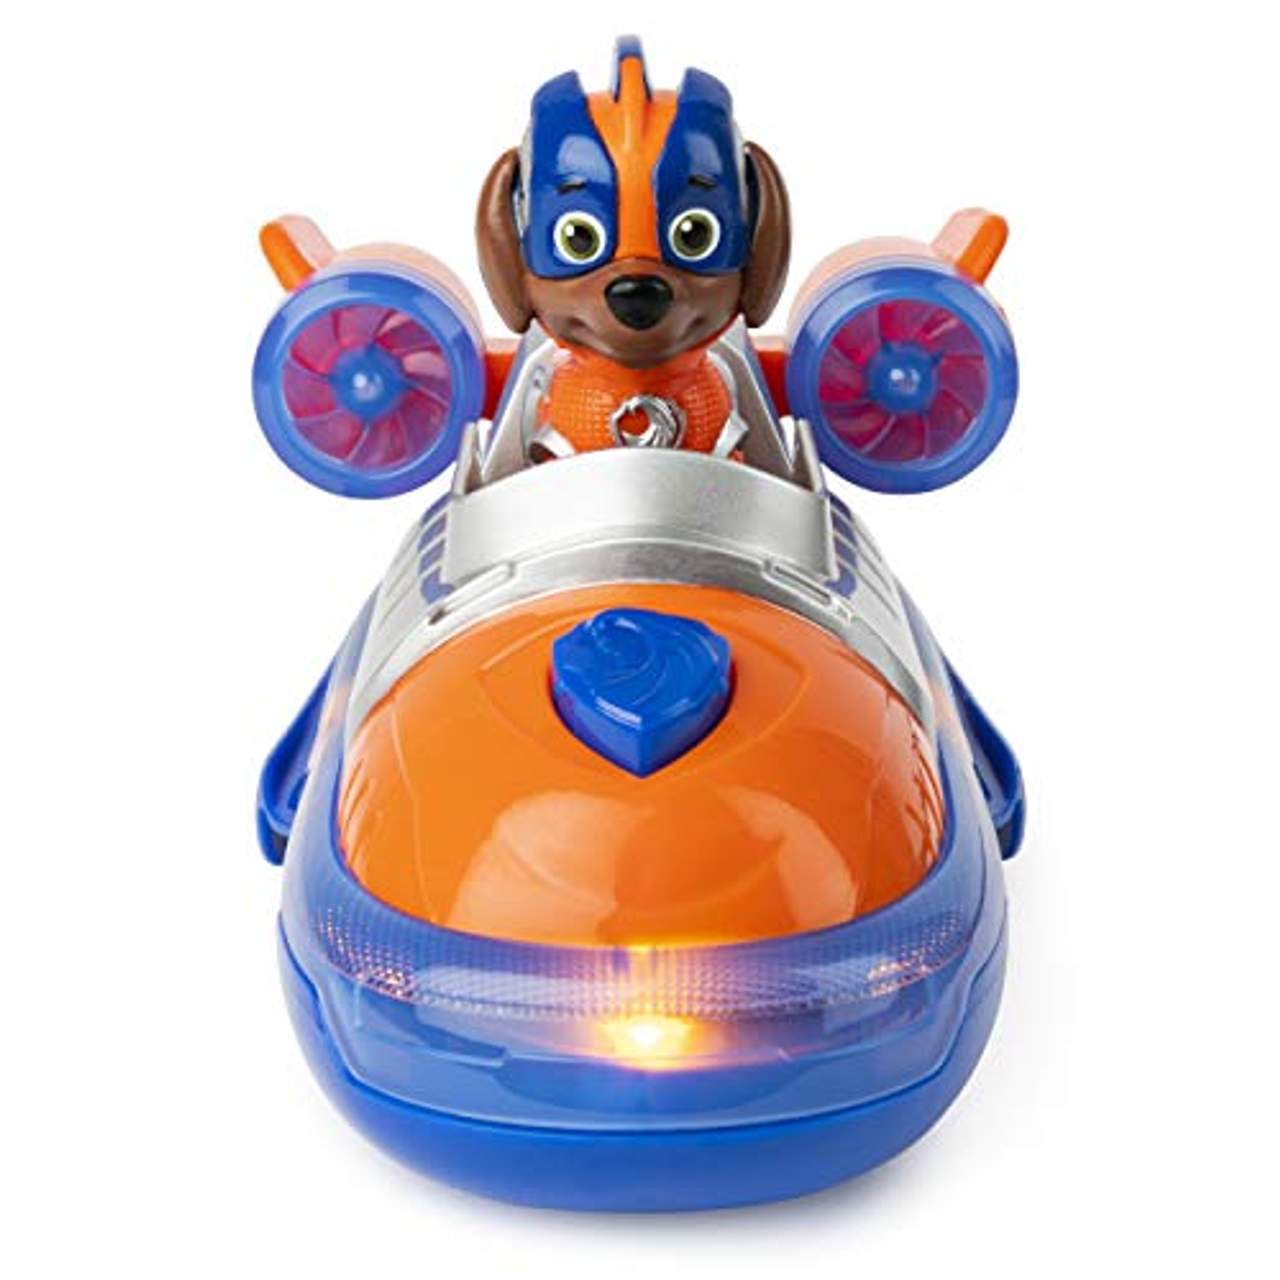 PAW Patrol 6054651 PAW Patrol Mighty Pups Super Paws Luftkissenboot